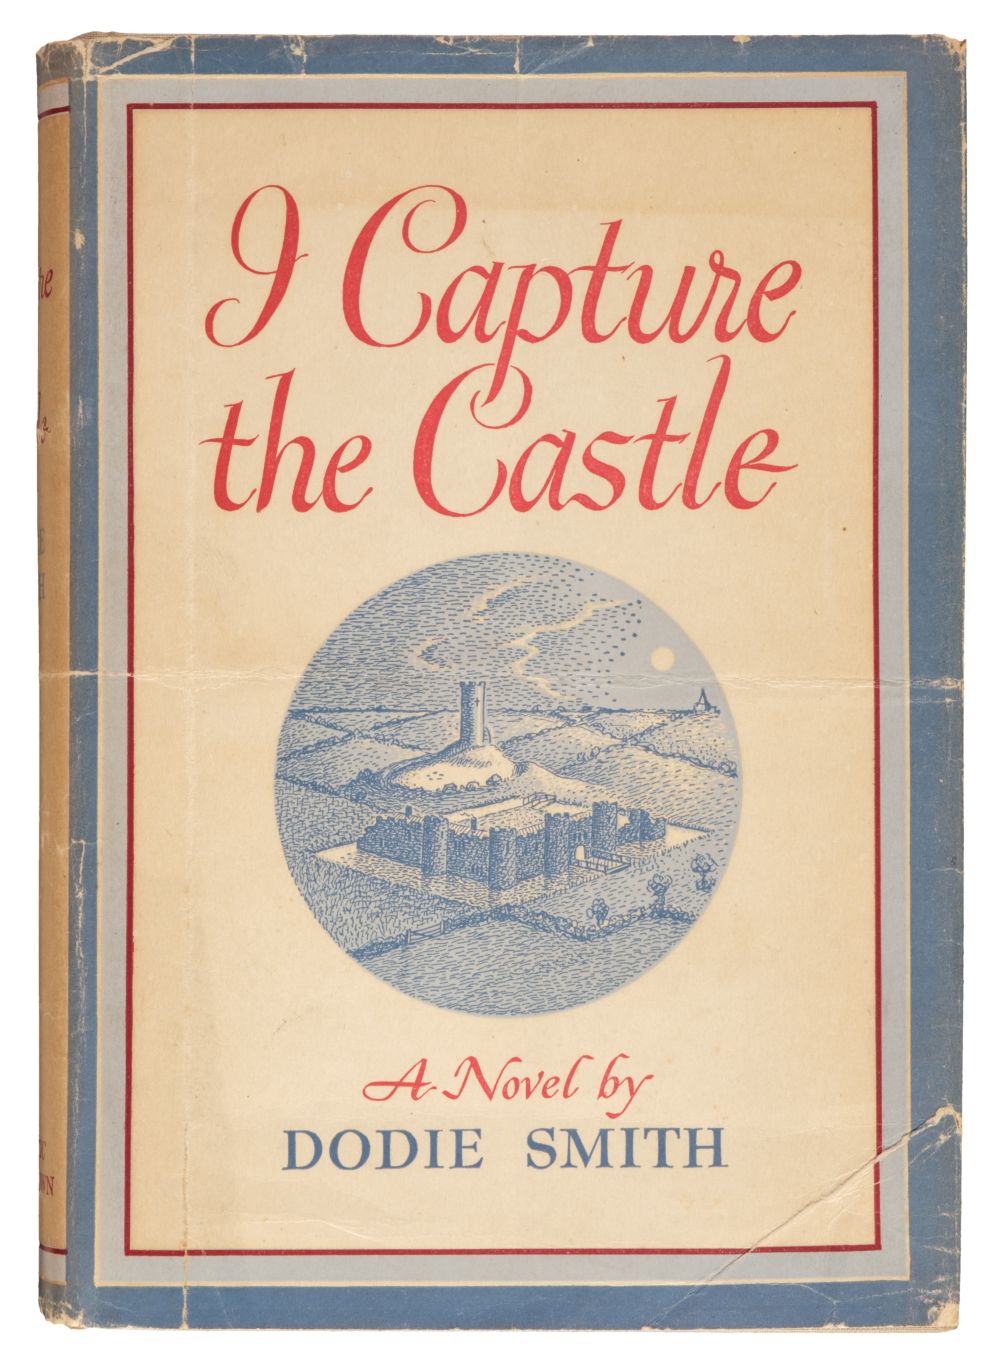 I Capture the Castle, by Dodie Smith